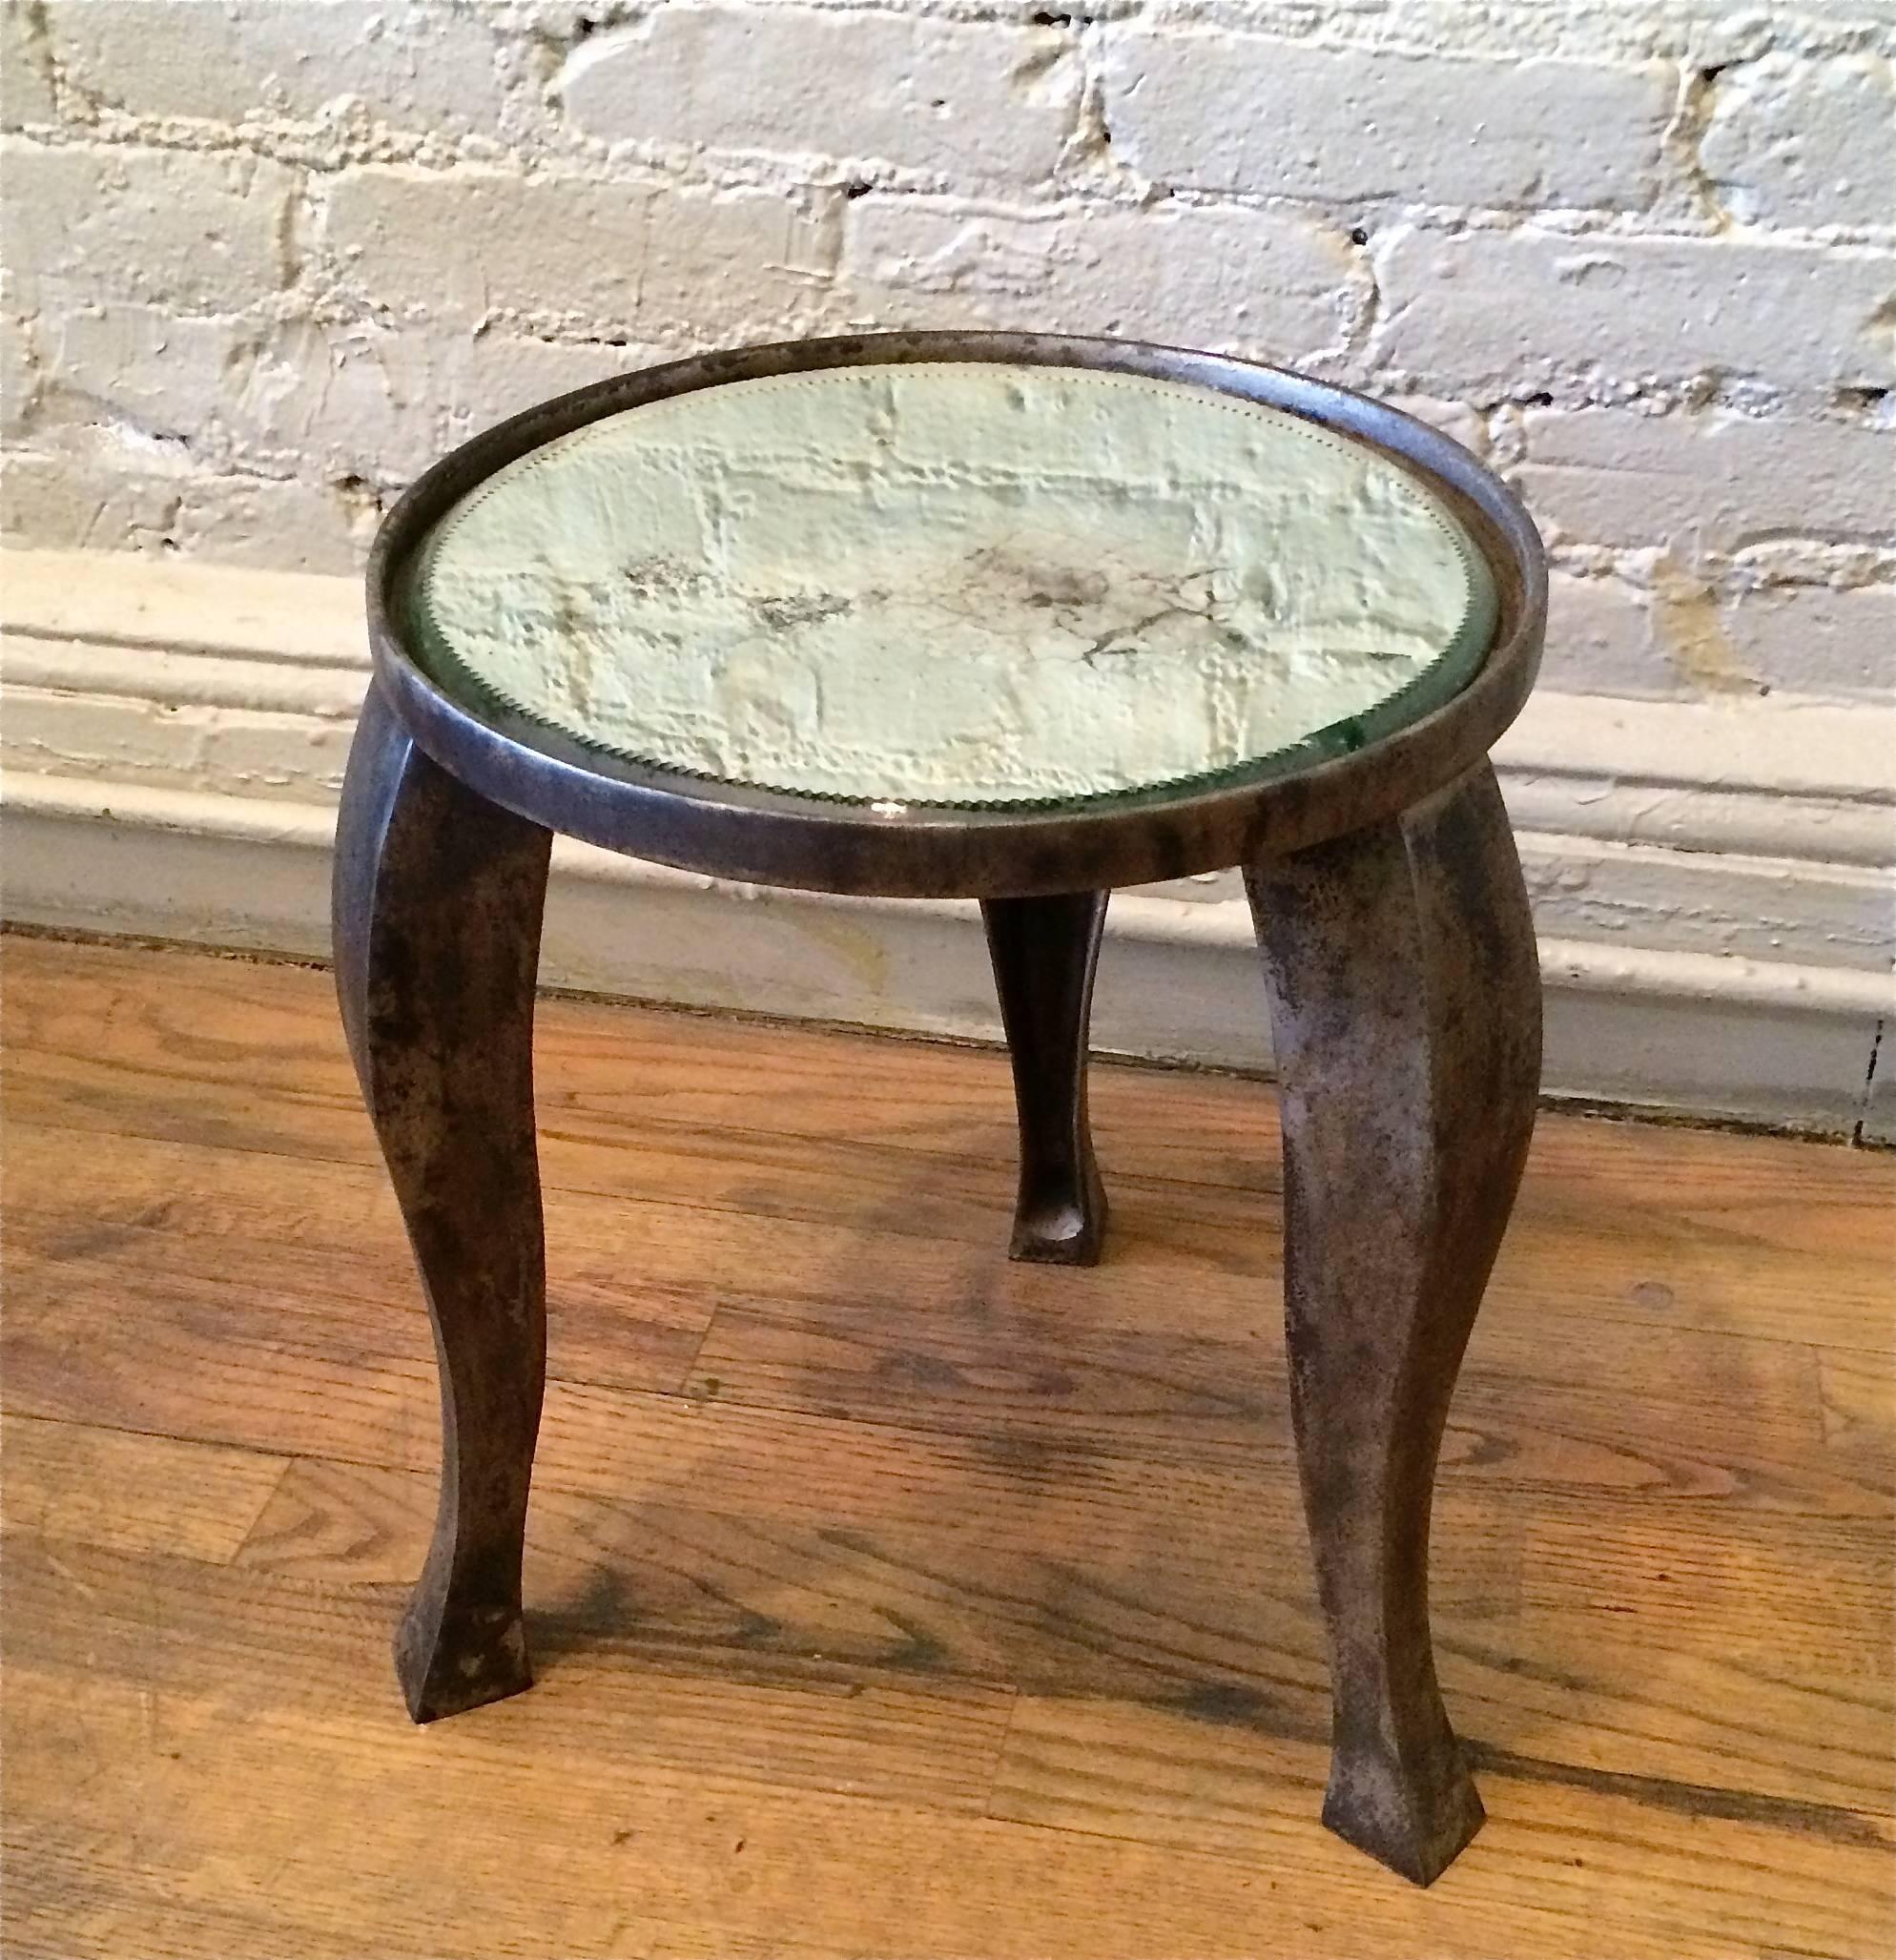 Industrial, cast iron base converted side table featuring distressed mirror top. The base surface shows traces of nickel-plating that captures a unique patina and is sealed to retain this current patina.